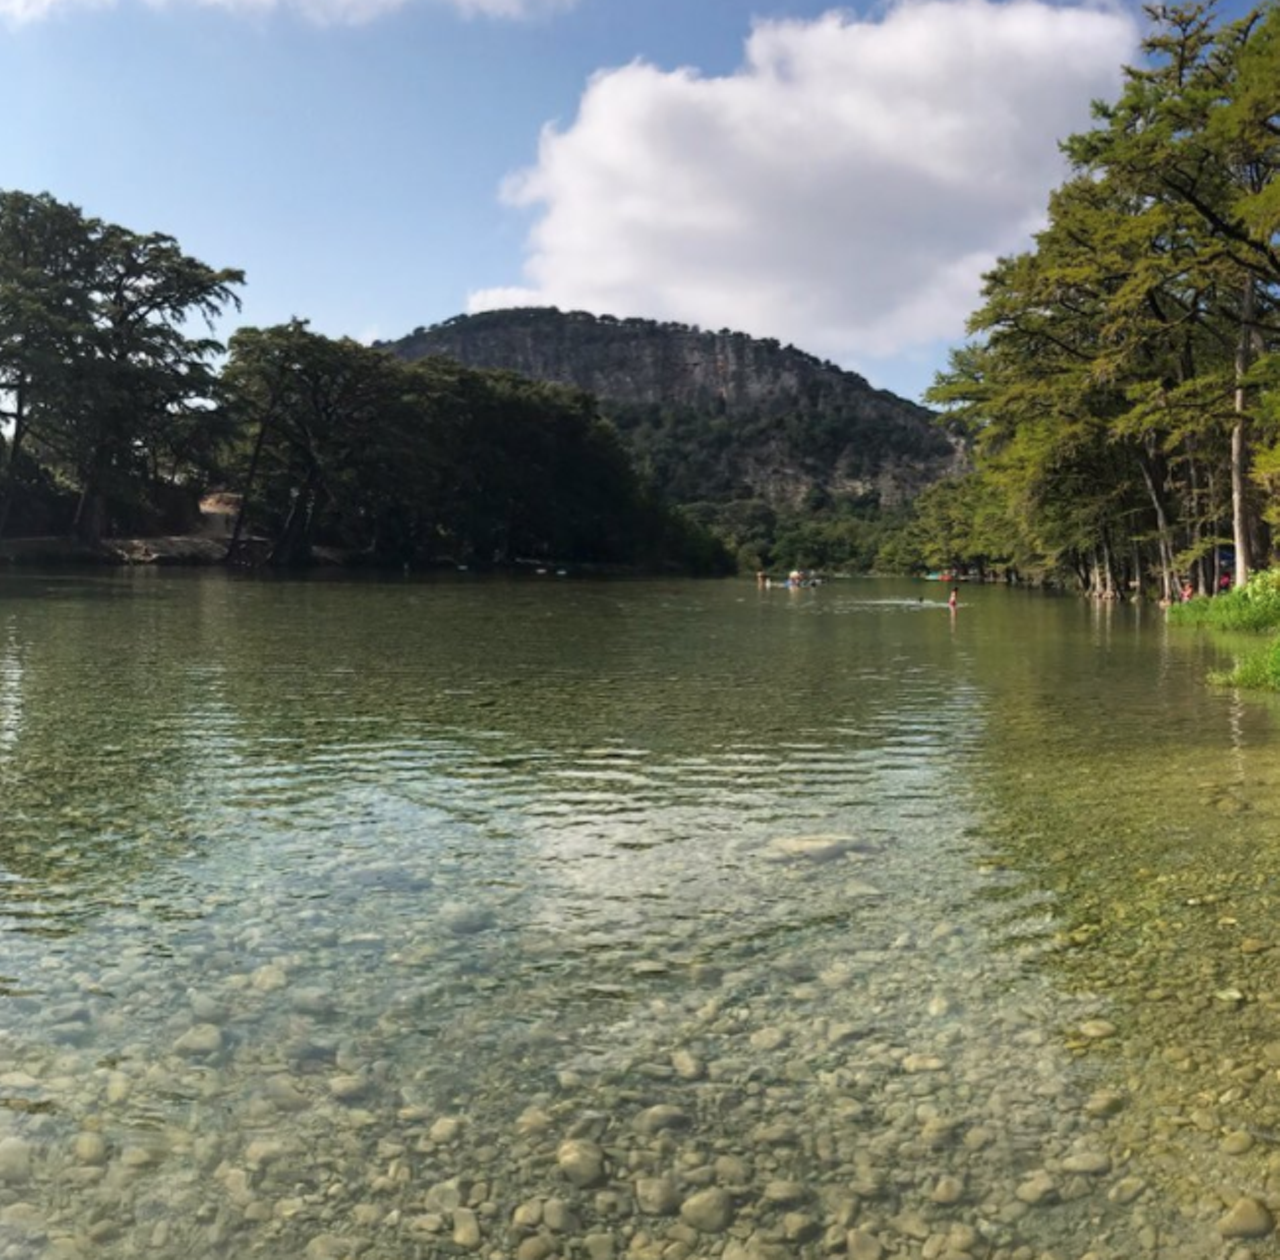 Go fishing out at Garner State Park
234 RR 1050, Concan, (830) 232-6132, tpwd.texas.gov
With water so clear, you’ll be tempted to swim. Take it easy and enjoy a day on the water with a fishing pole in hand. Just remember to pack a cooler to to keep you occupied between your catches.
Photo via Instagram, karen.ayl